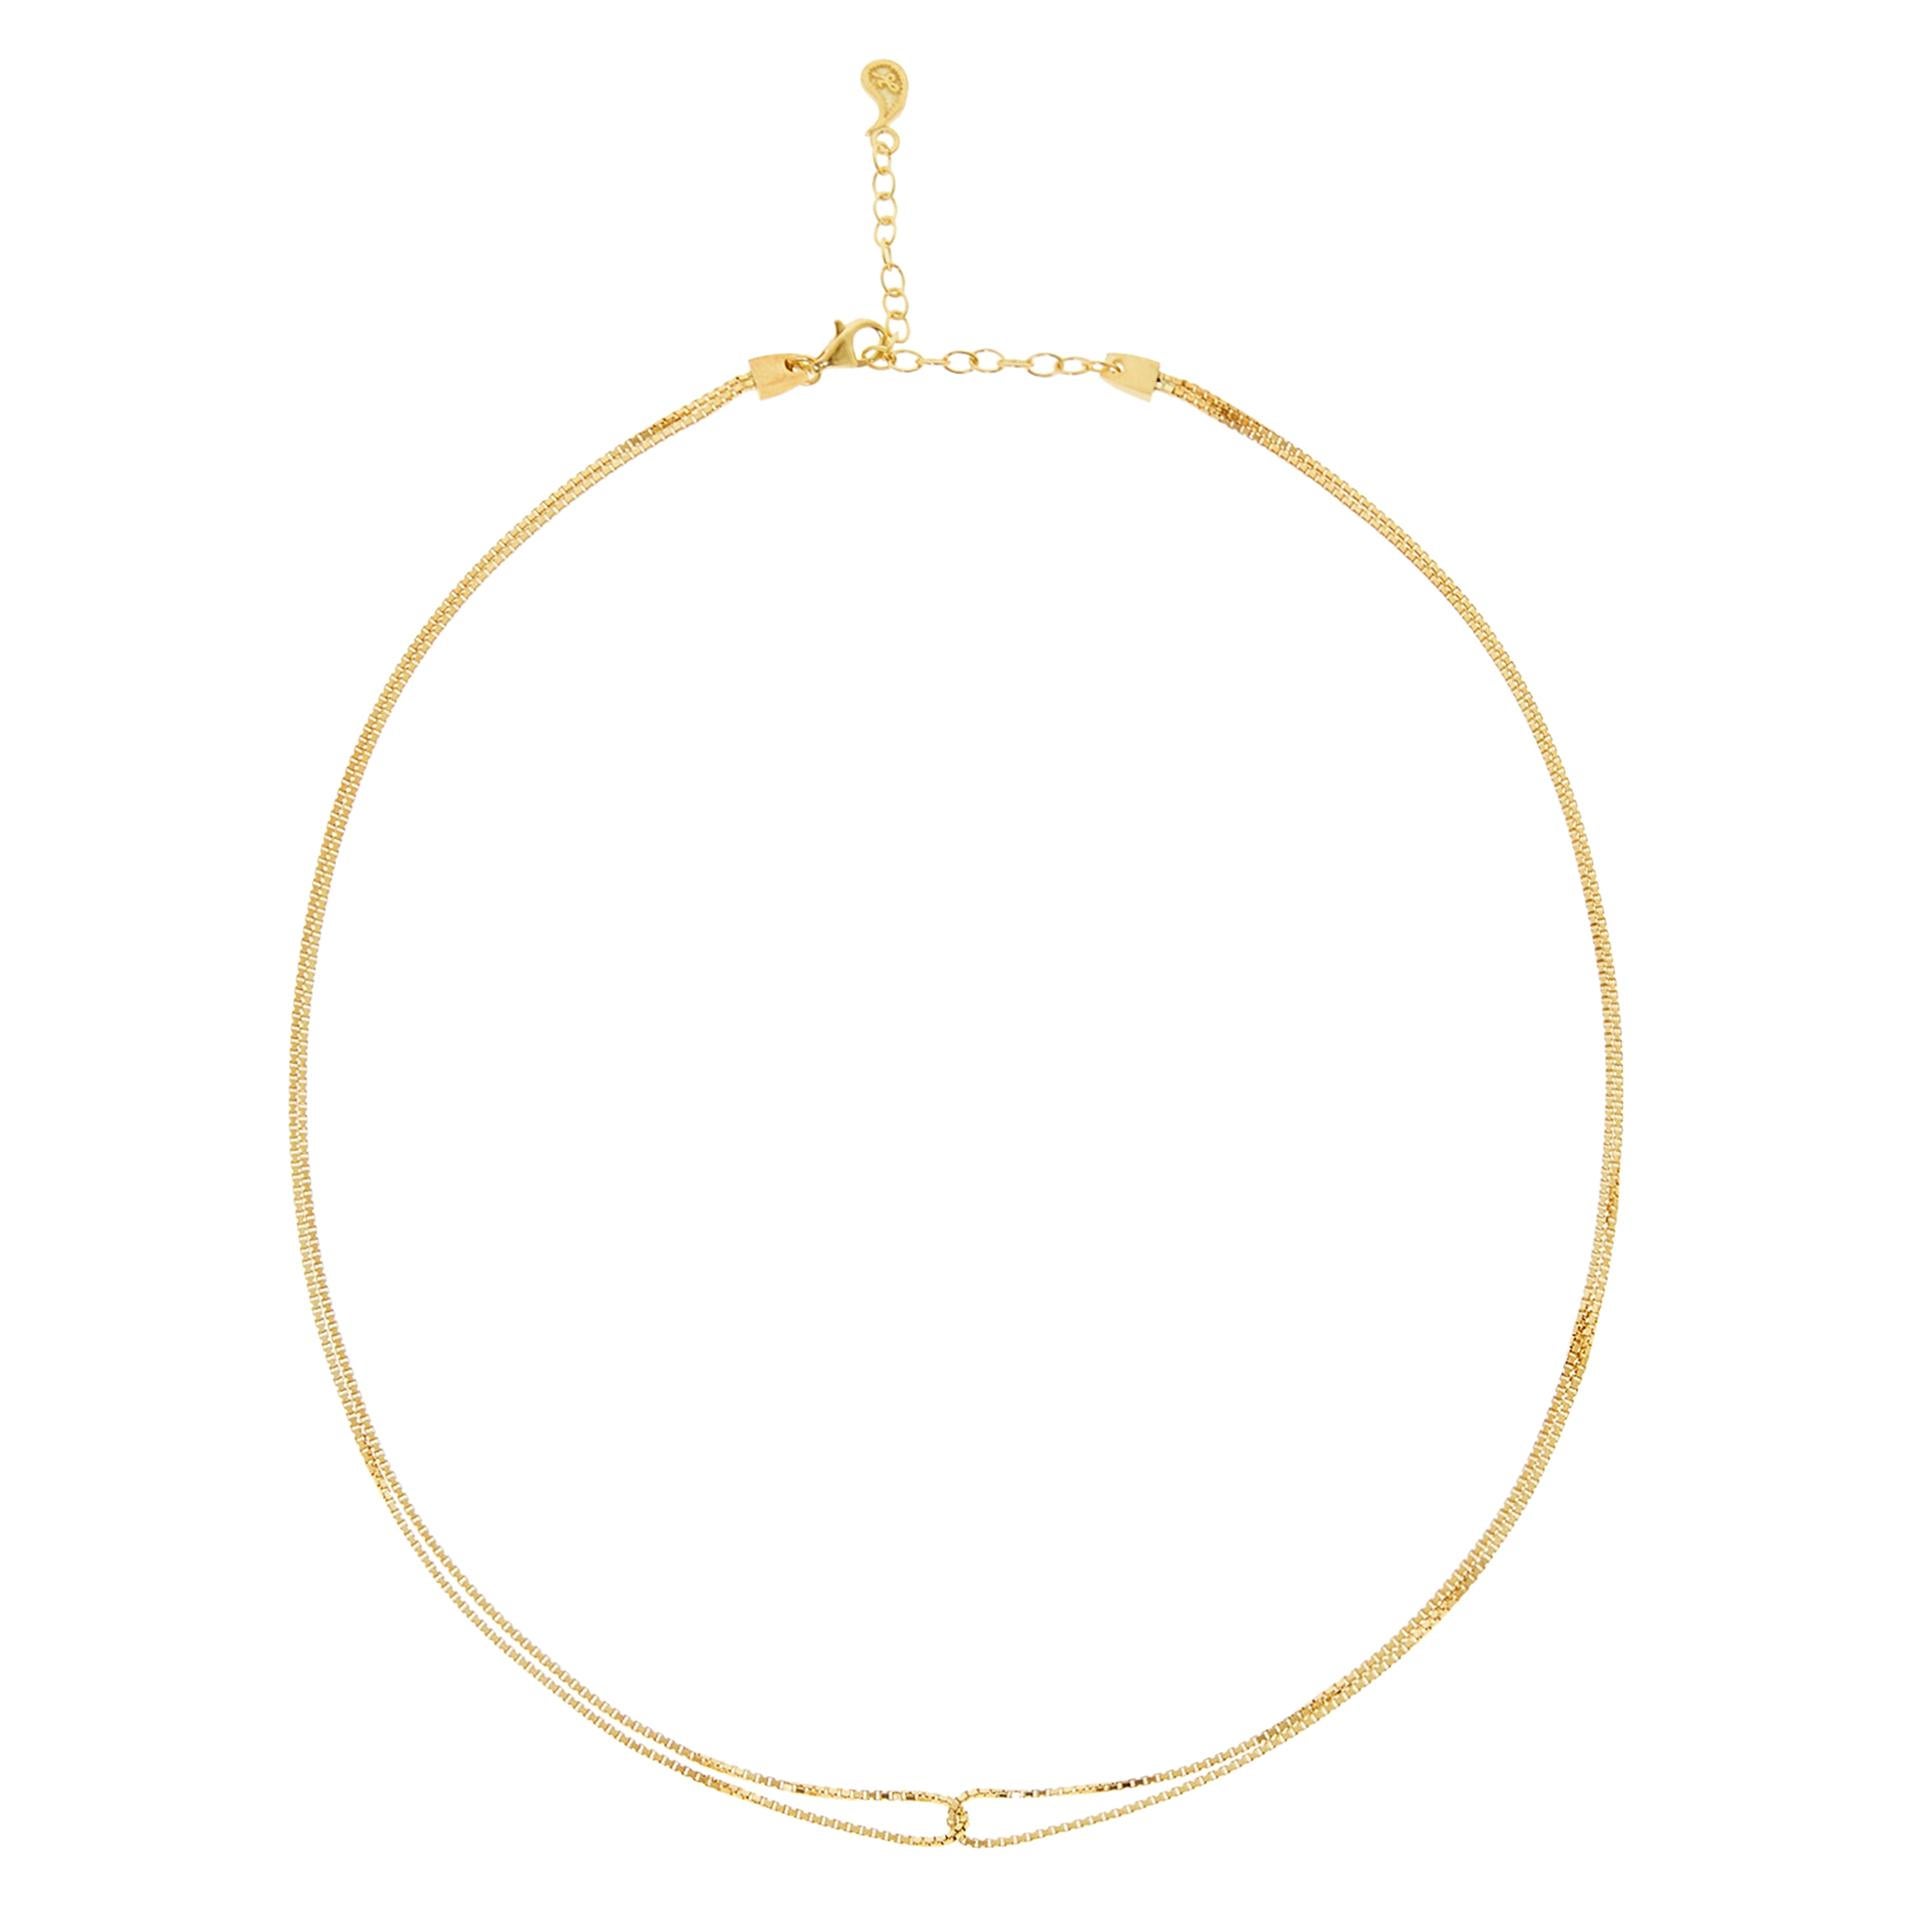 Necklace Minimal Box Chain Shiny 18 Karat Gold-Plated Silver Greek Jewelry For Sale